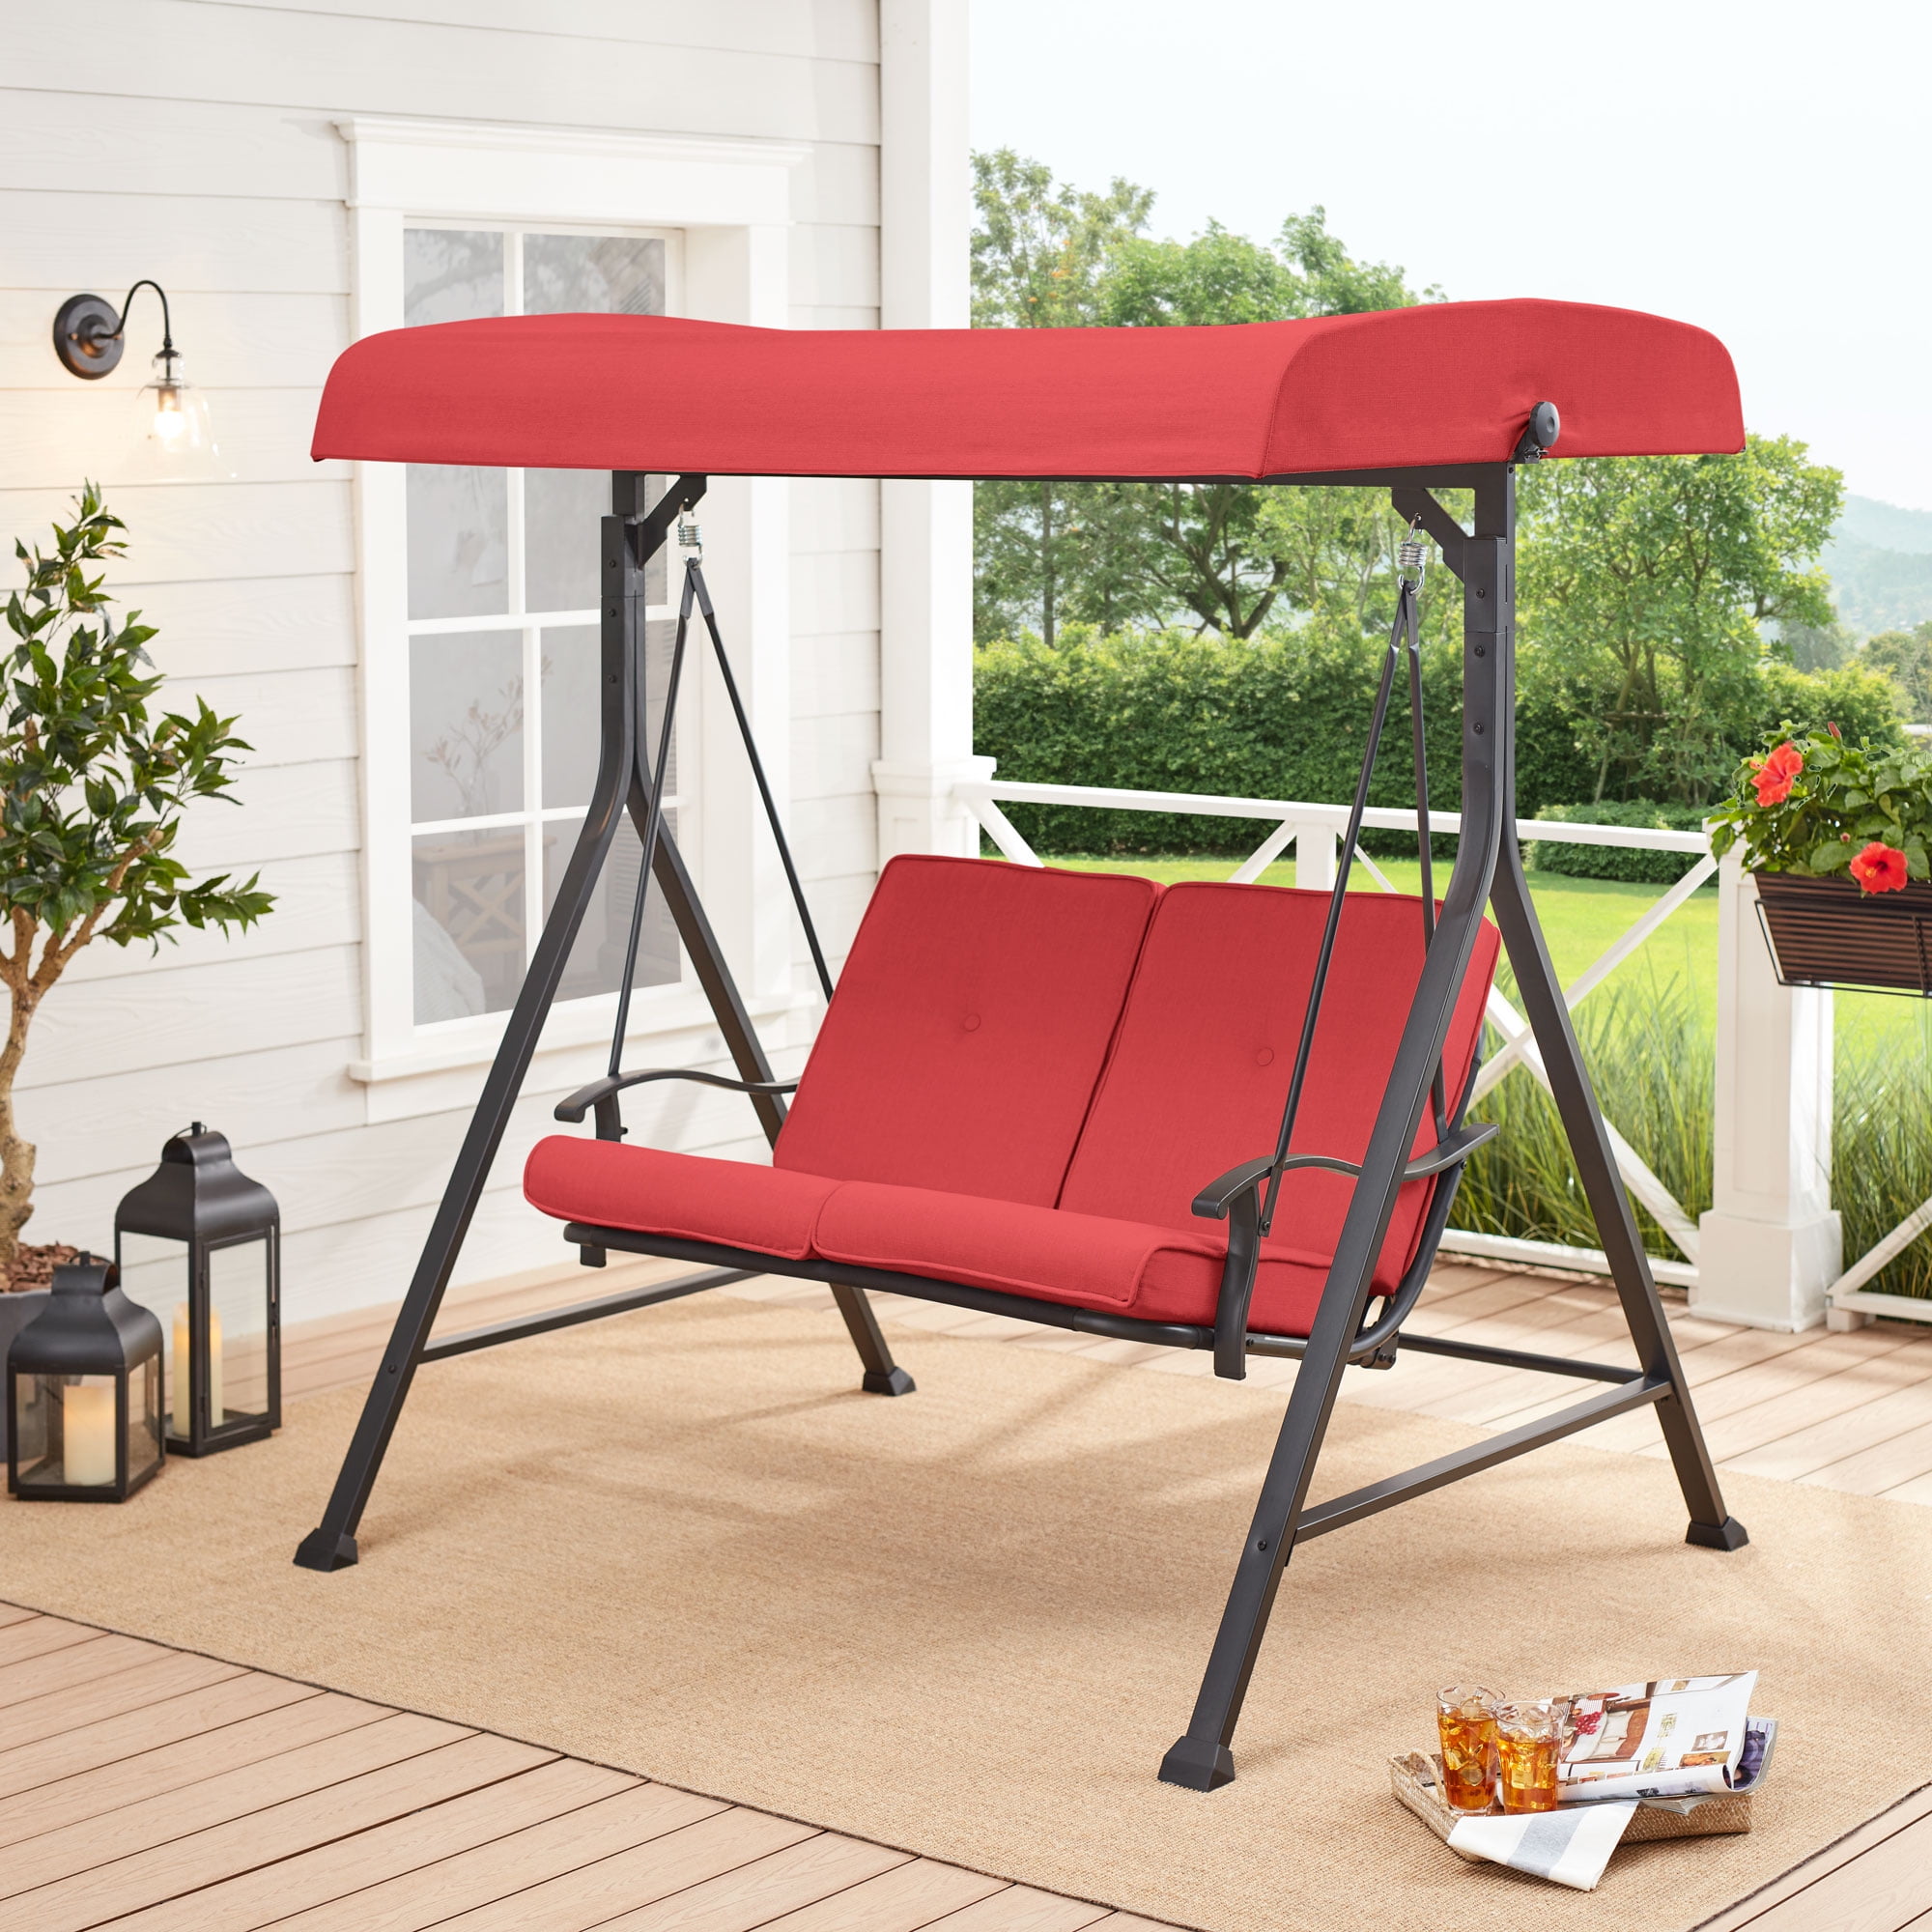 Details about   Lonabr 3-Person Outdoor Swing Chair Adjustable Canopy Hammock Seats Patio Porch 